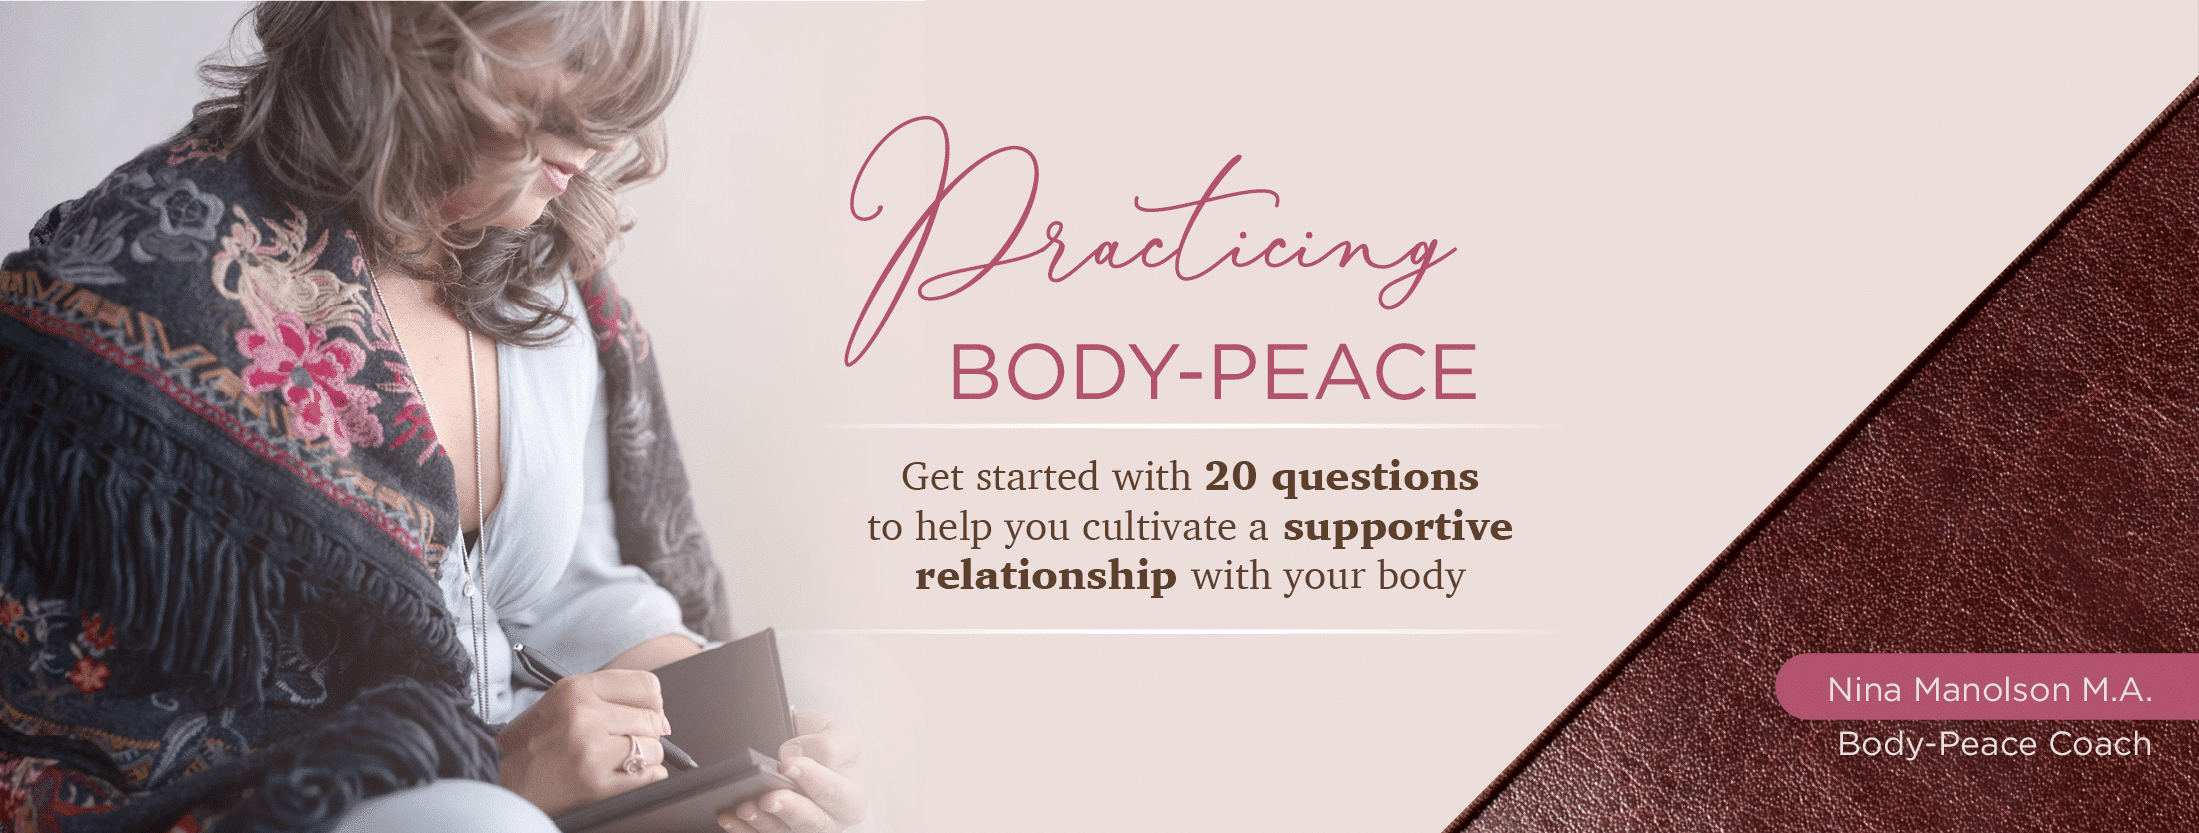 Practicing Body-Peace